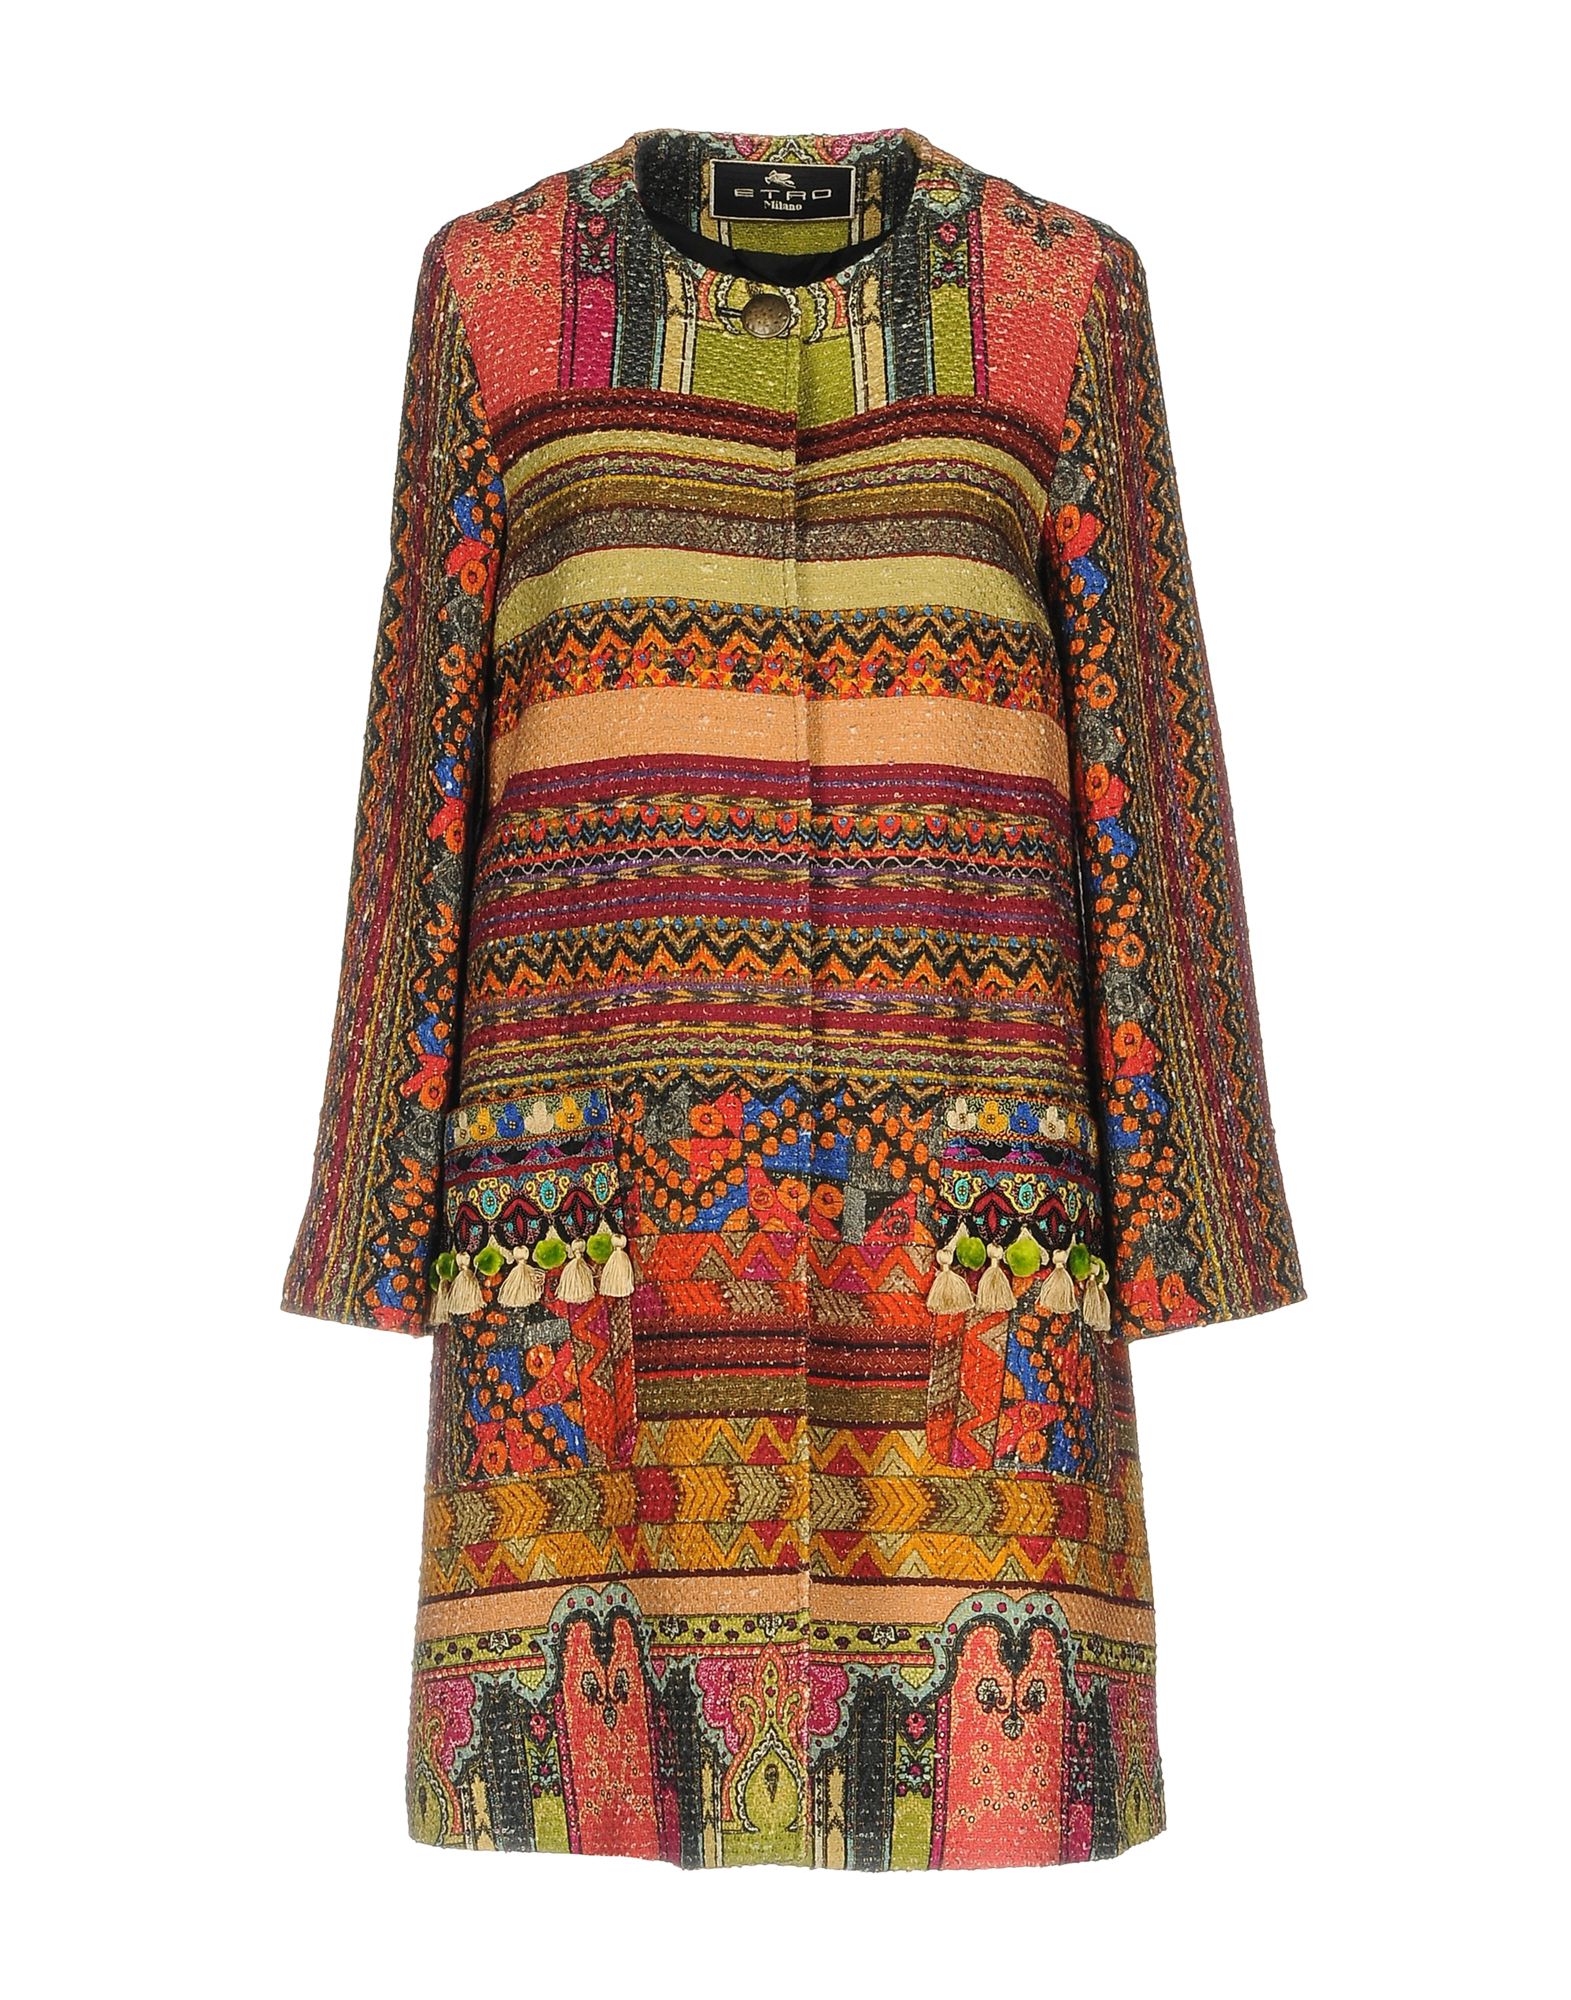 ETRO EMBROIDERED AND EMBELLISHED COTTON COAT, RED | ModeSens